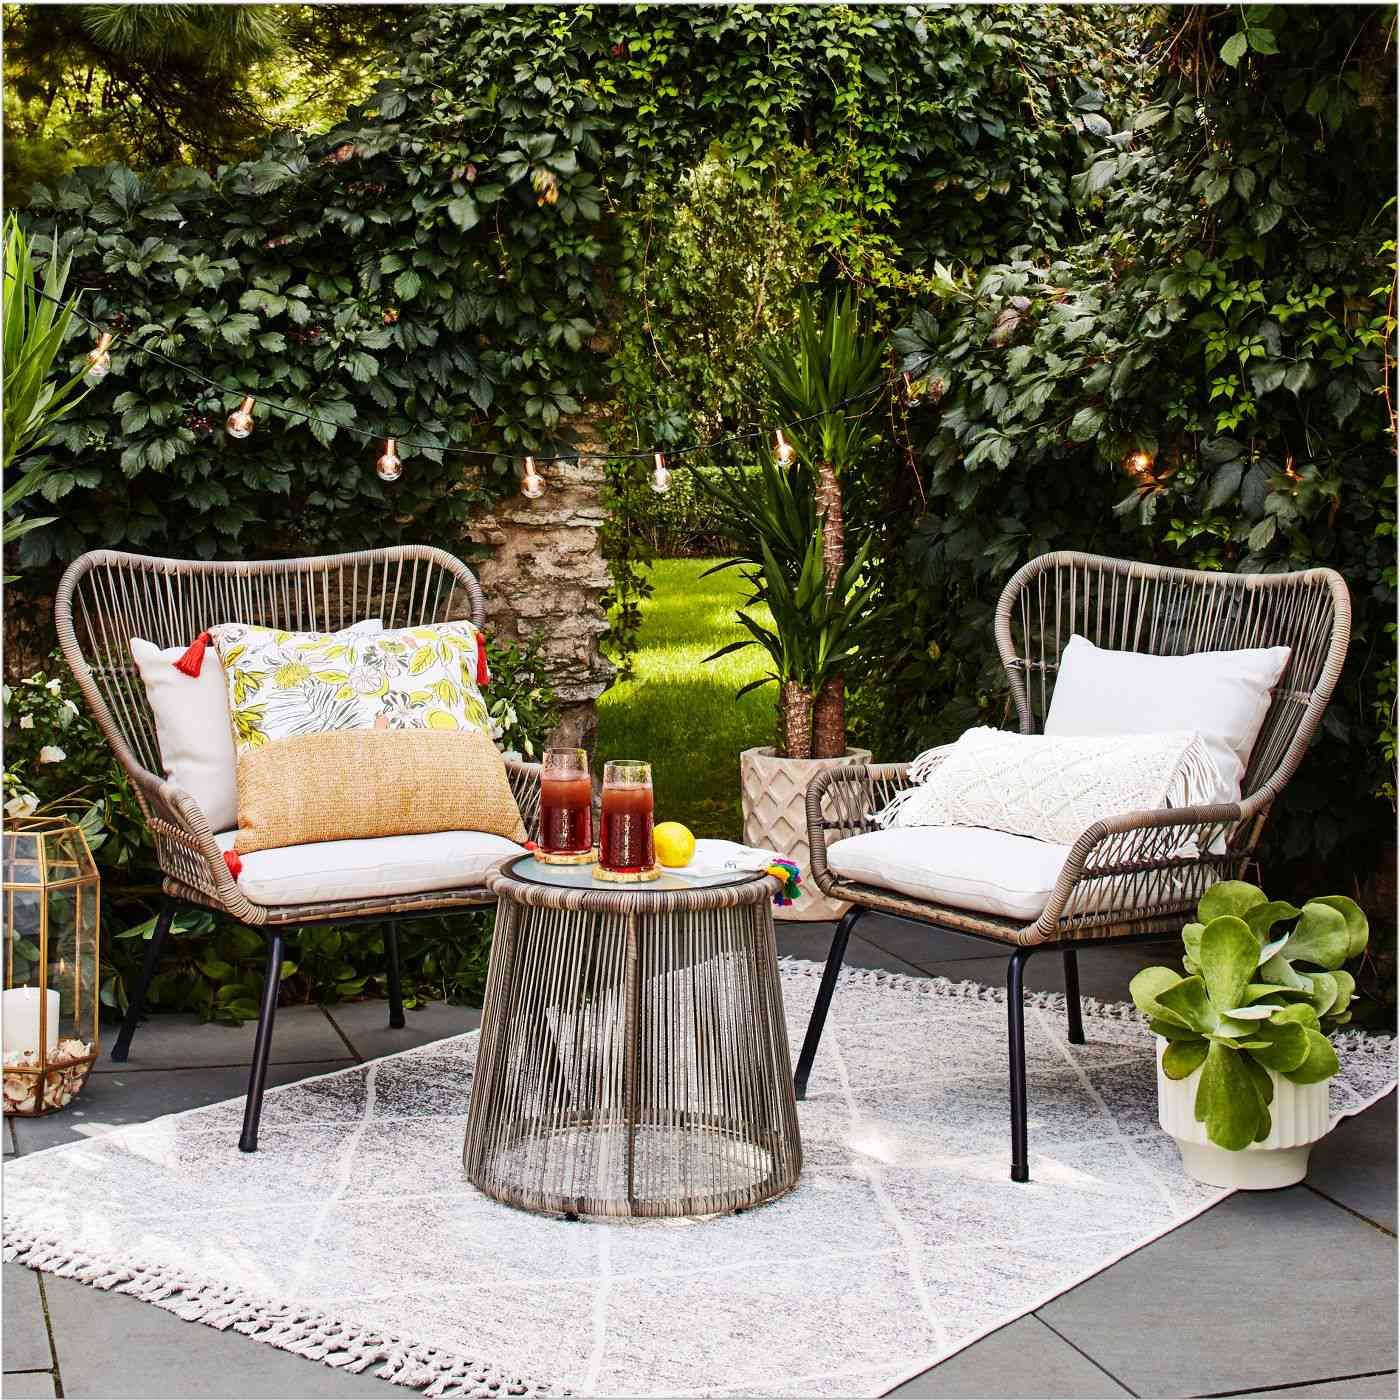 The Best Outdoor Furniture For Small Spaces With Regard To Backyard Porch Garden Patio Furniture Set (View 8 of 15)